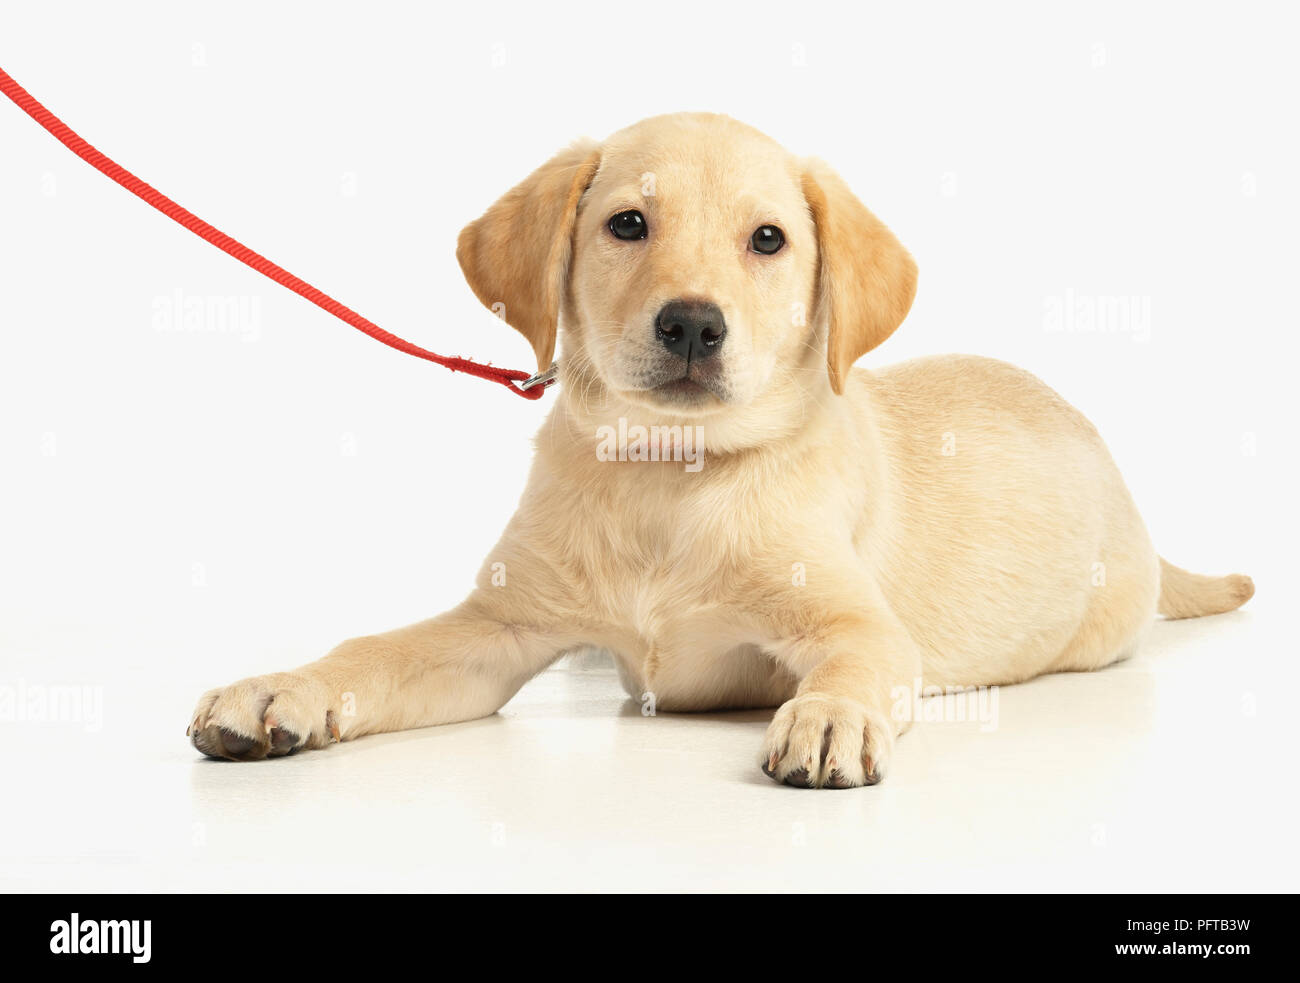 Labrador puppy sitting with lead on collar Stock Photo